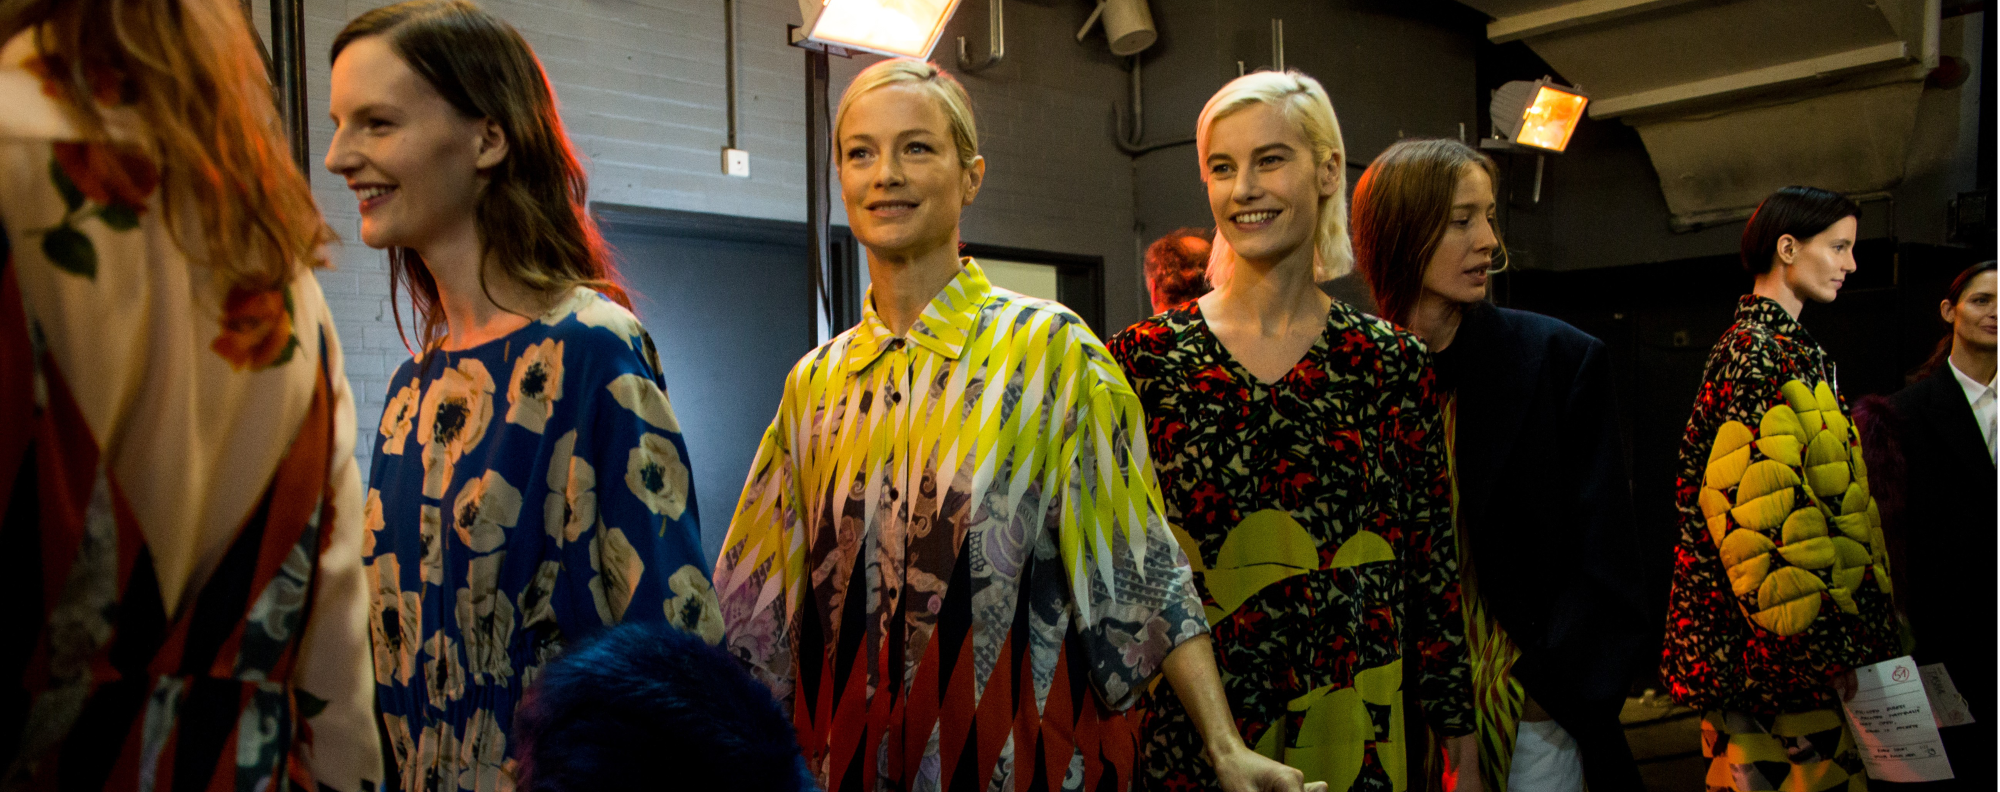 Why Dries Van Noten's 100th show pays homage to iconic 90s models and celebrates bold prints